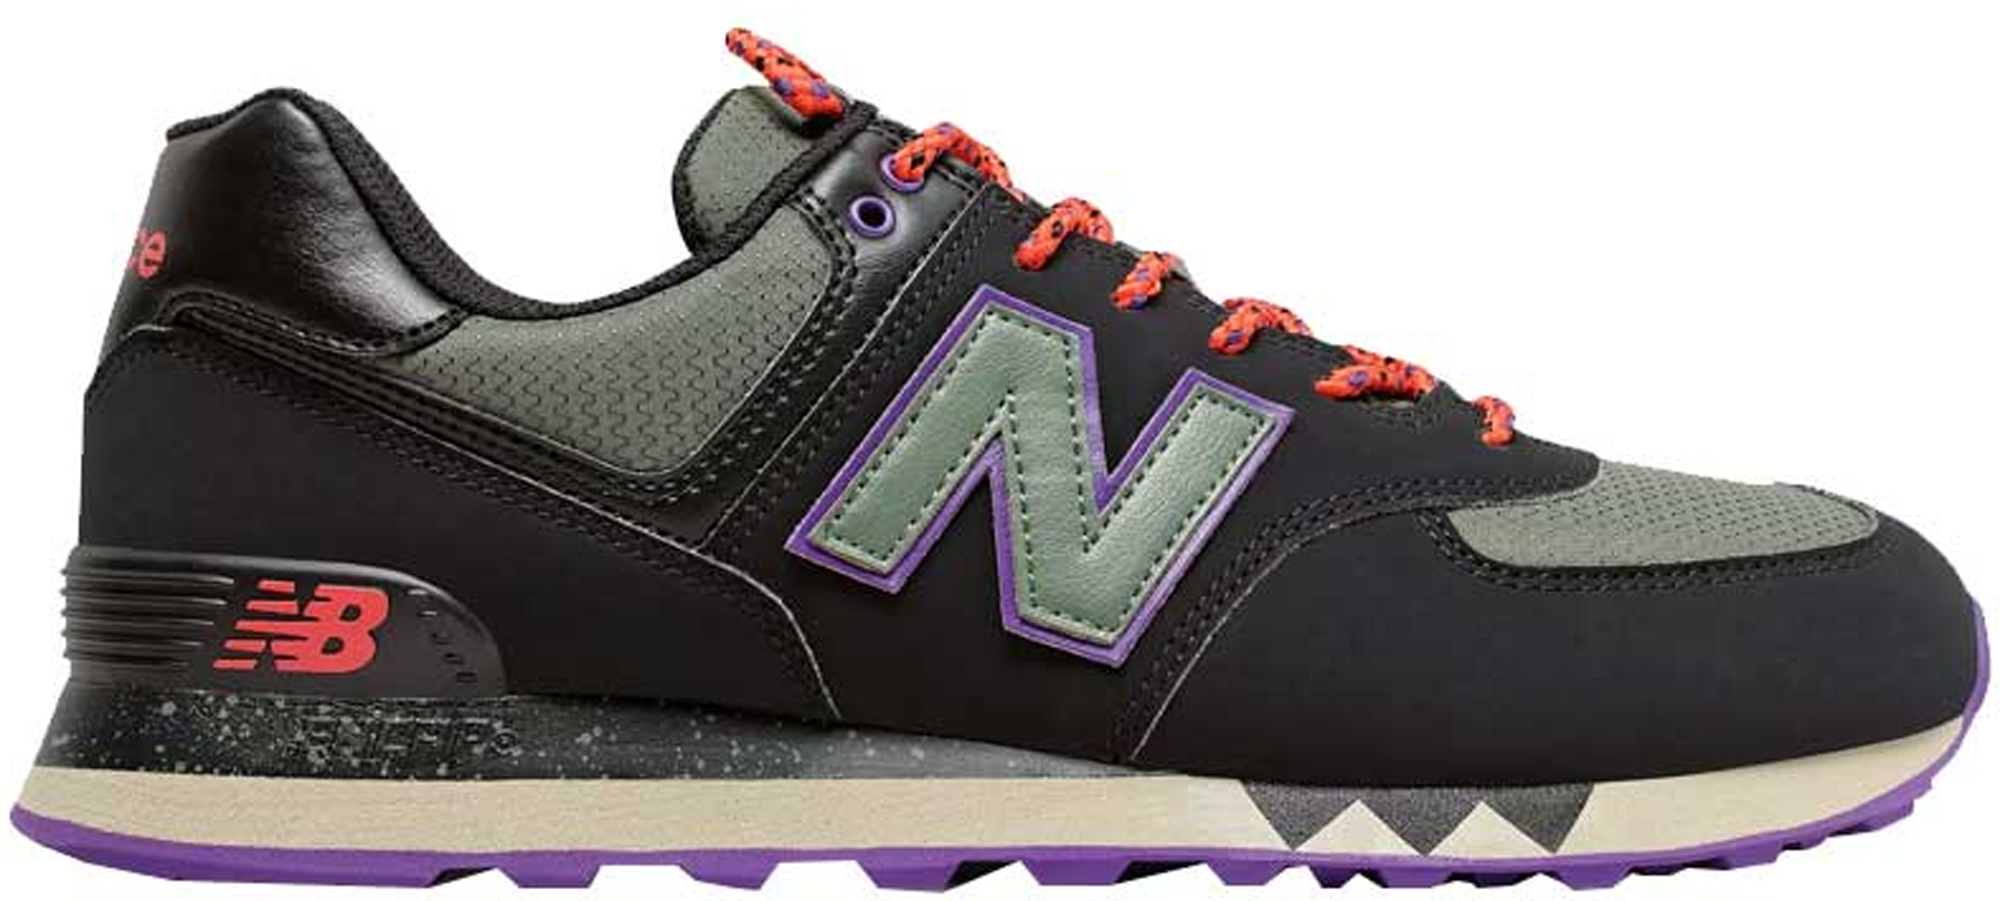 New Balance 574 Outdoor Pack Black 